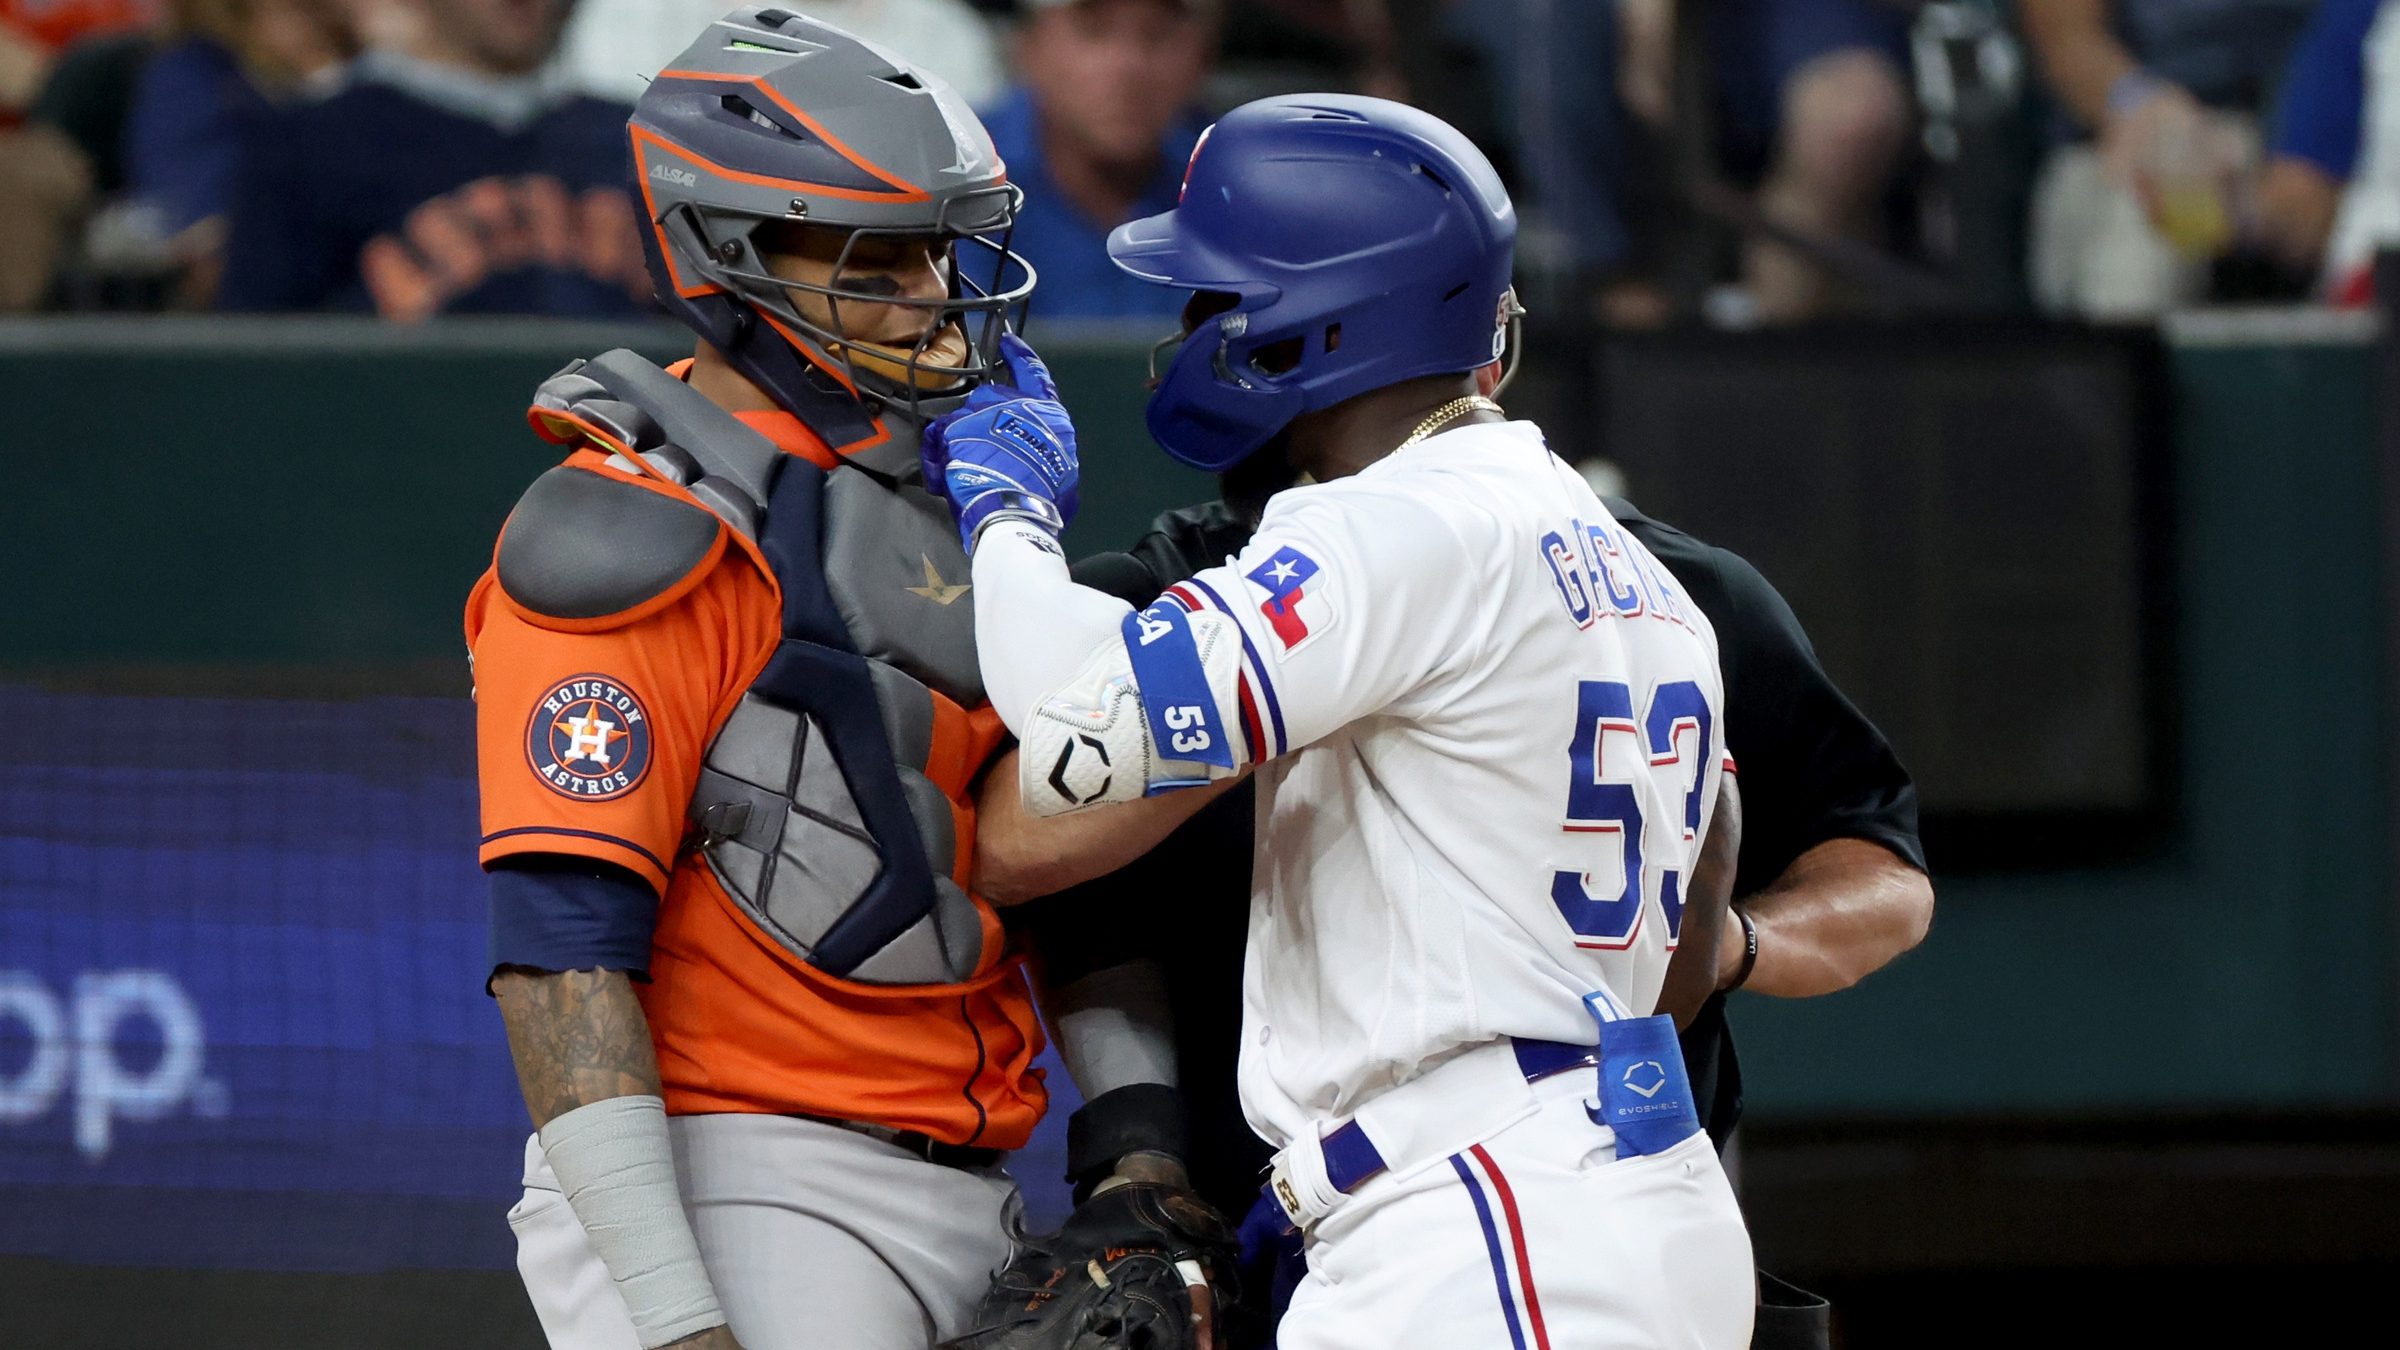 Jeff McNeil Becomes 1st Mets Player to Win MLB Batting Title